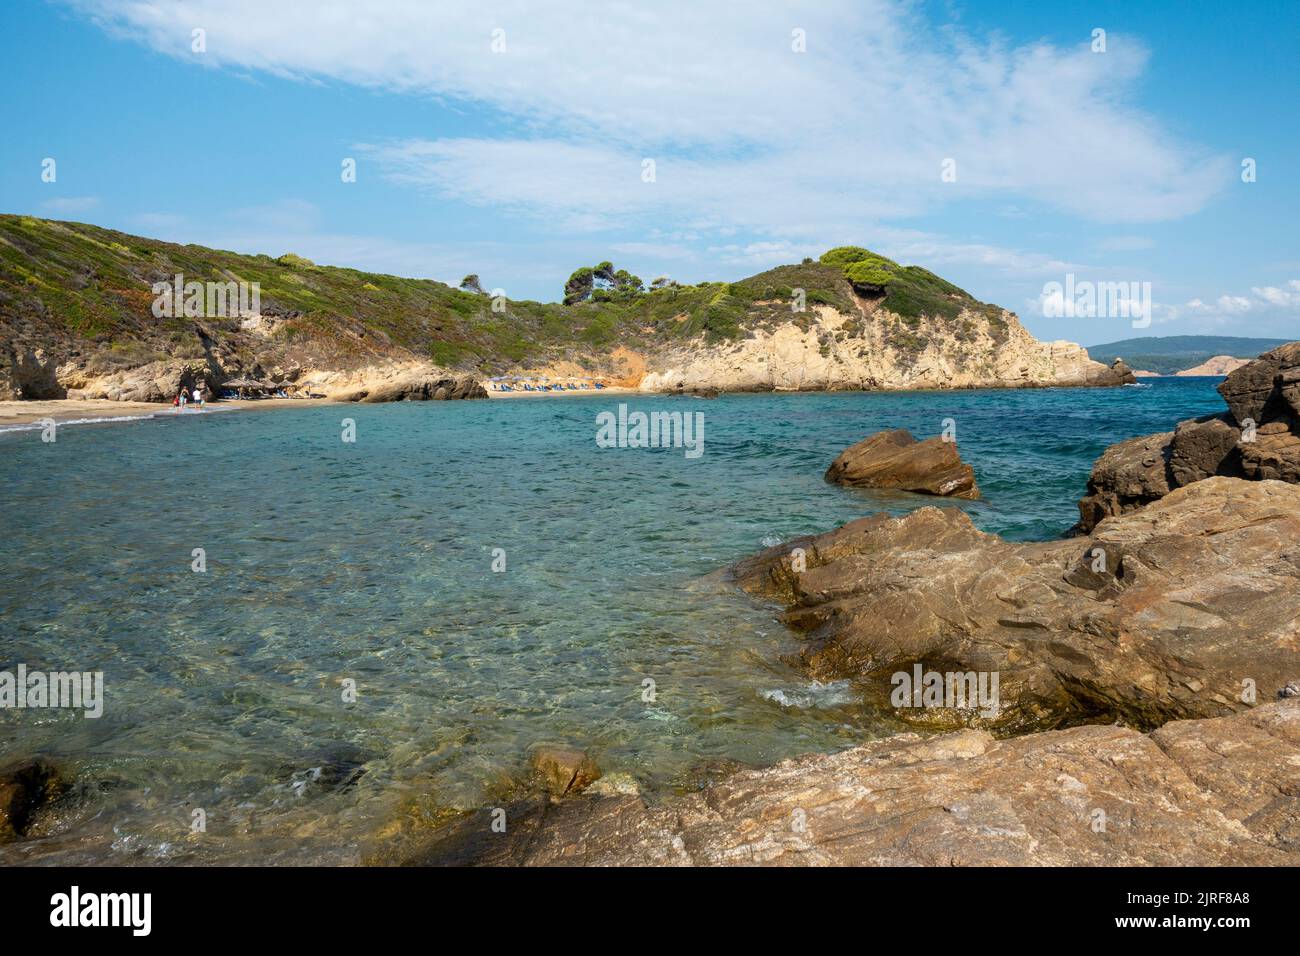 SKIATHOS, GREECE - 14-22-2022 - Krifi Ammos beach, one of the most beautiful in Skiathos, with rich vegetation and turquoise sea. Stock Photo